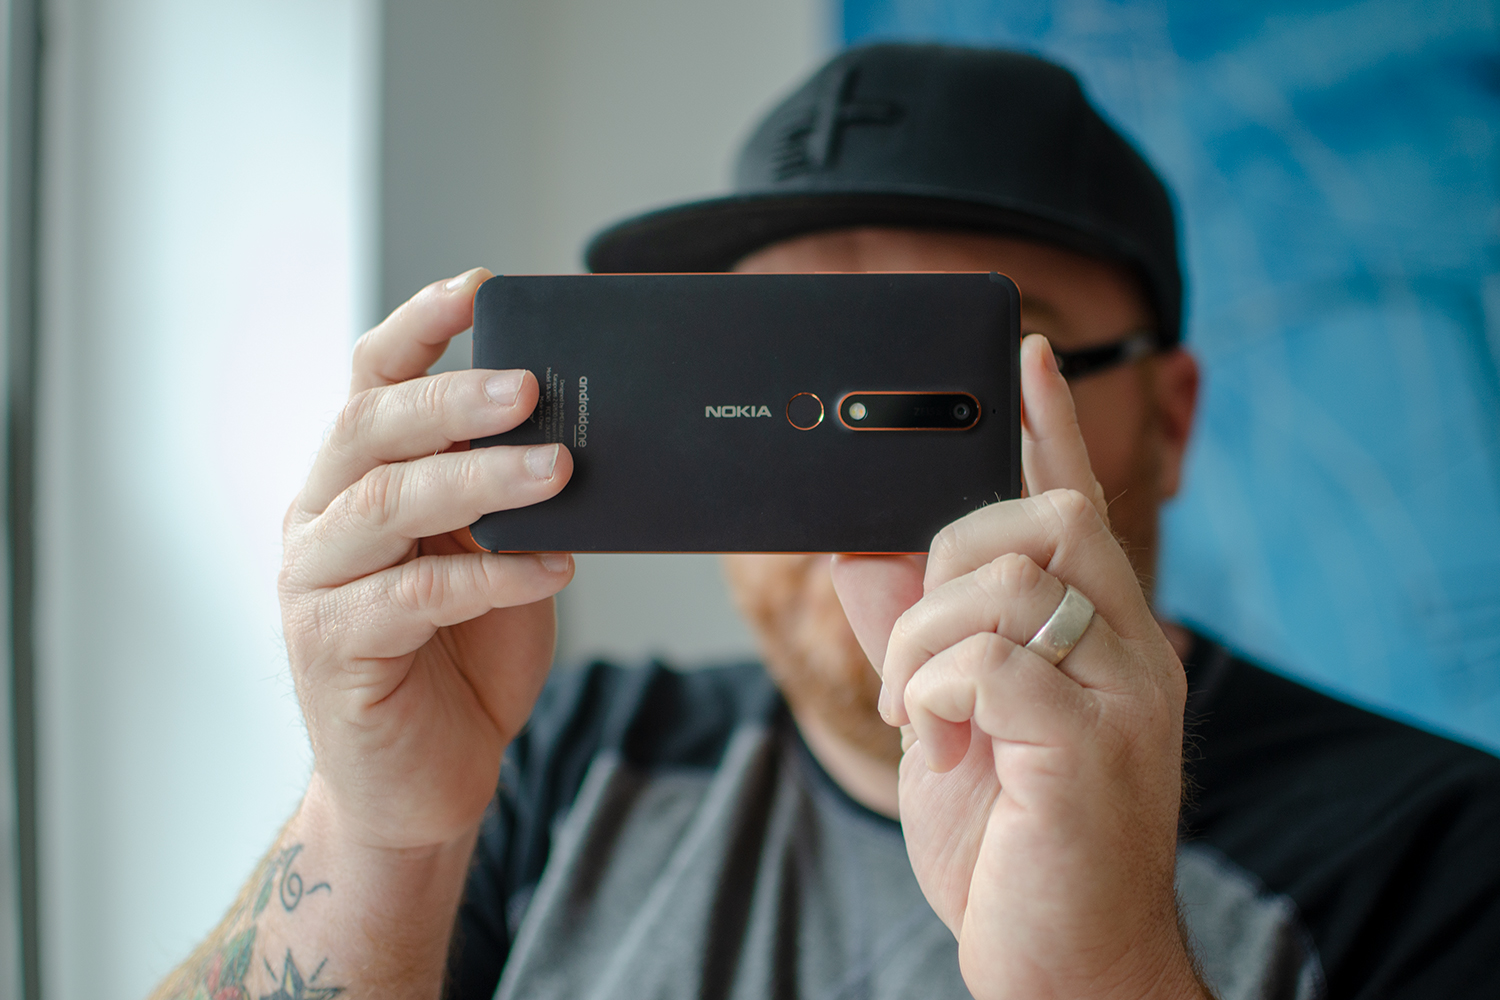 HMD Global releases Nokia 6 Android smartphone: Digital Photography Review